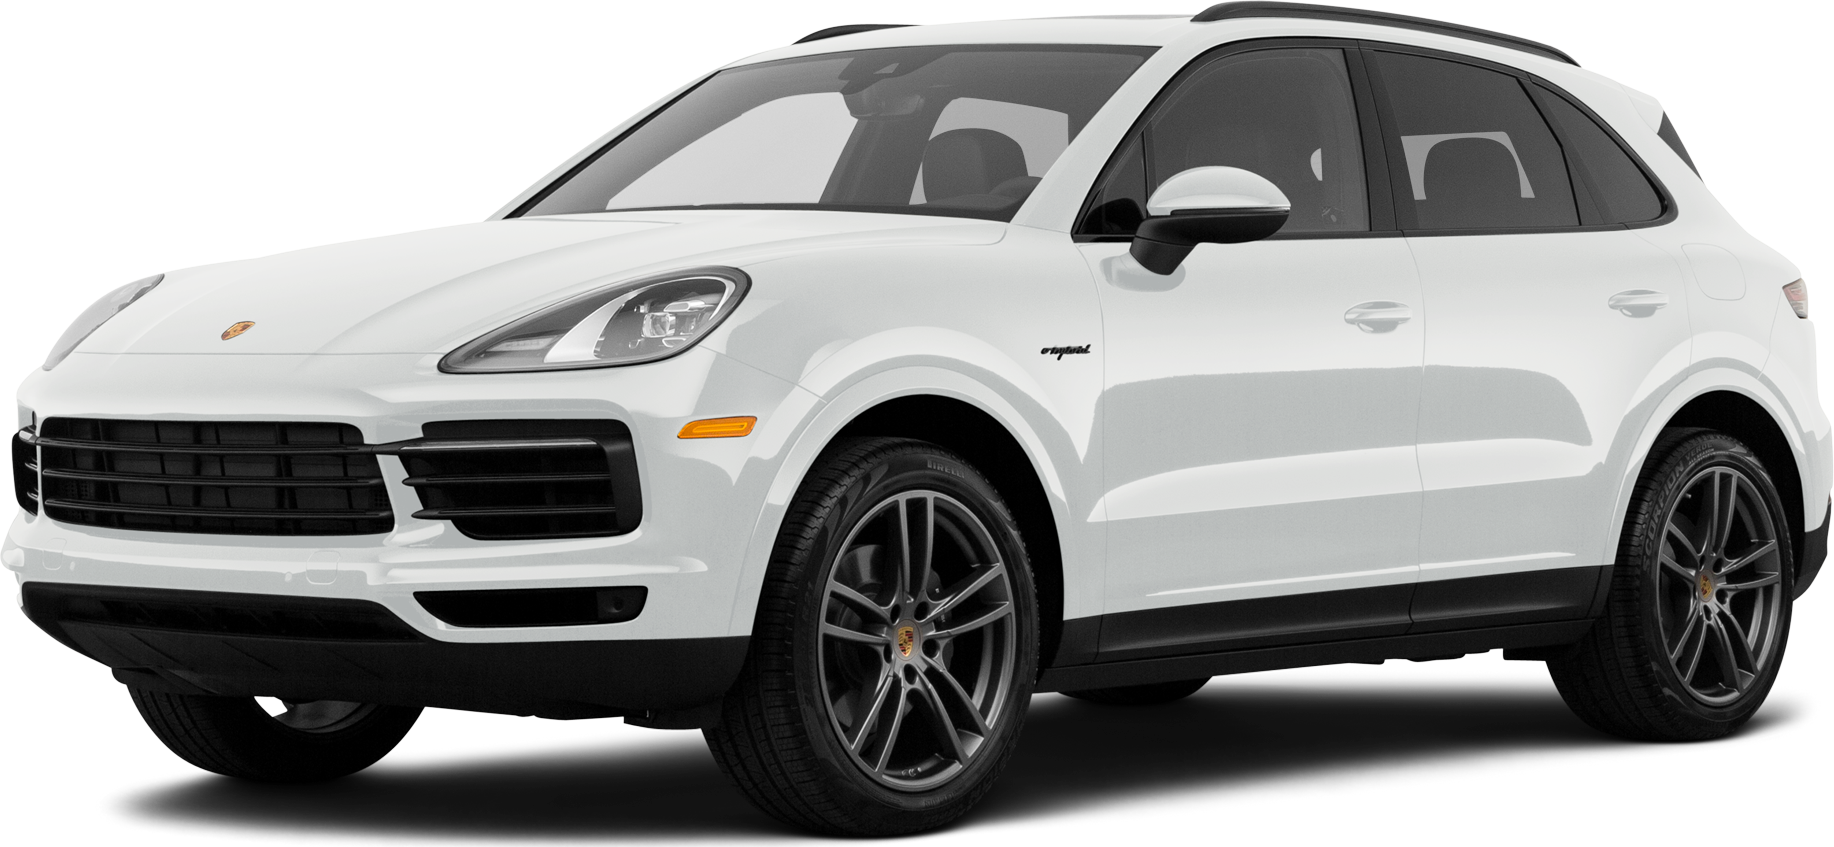 Which Porsche Cayenne Body Style is Right For Me?